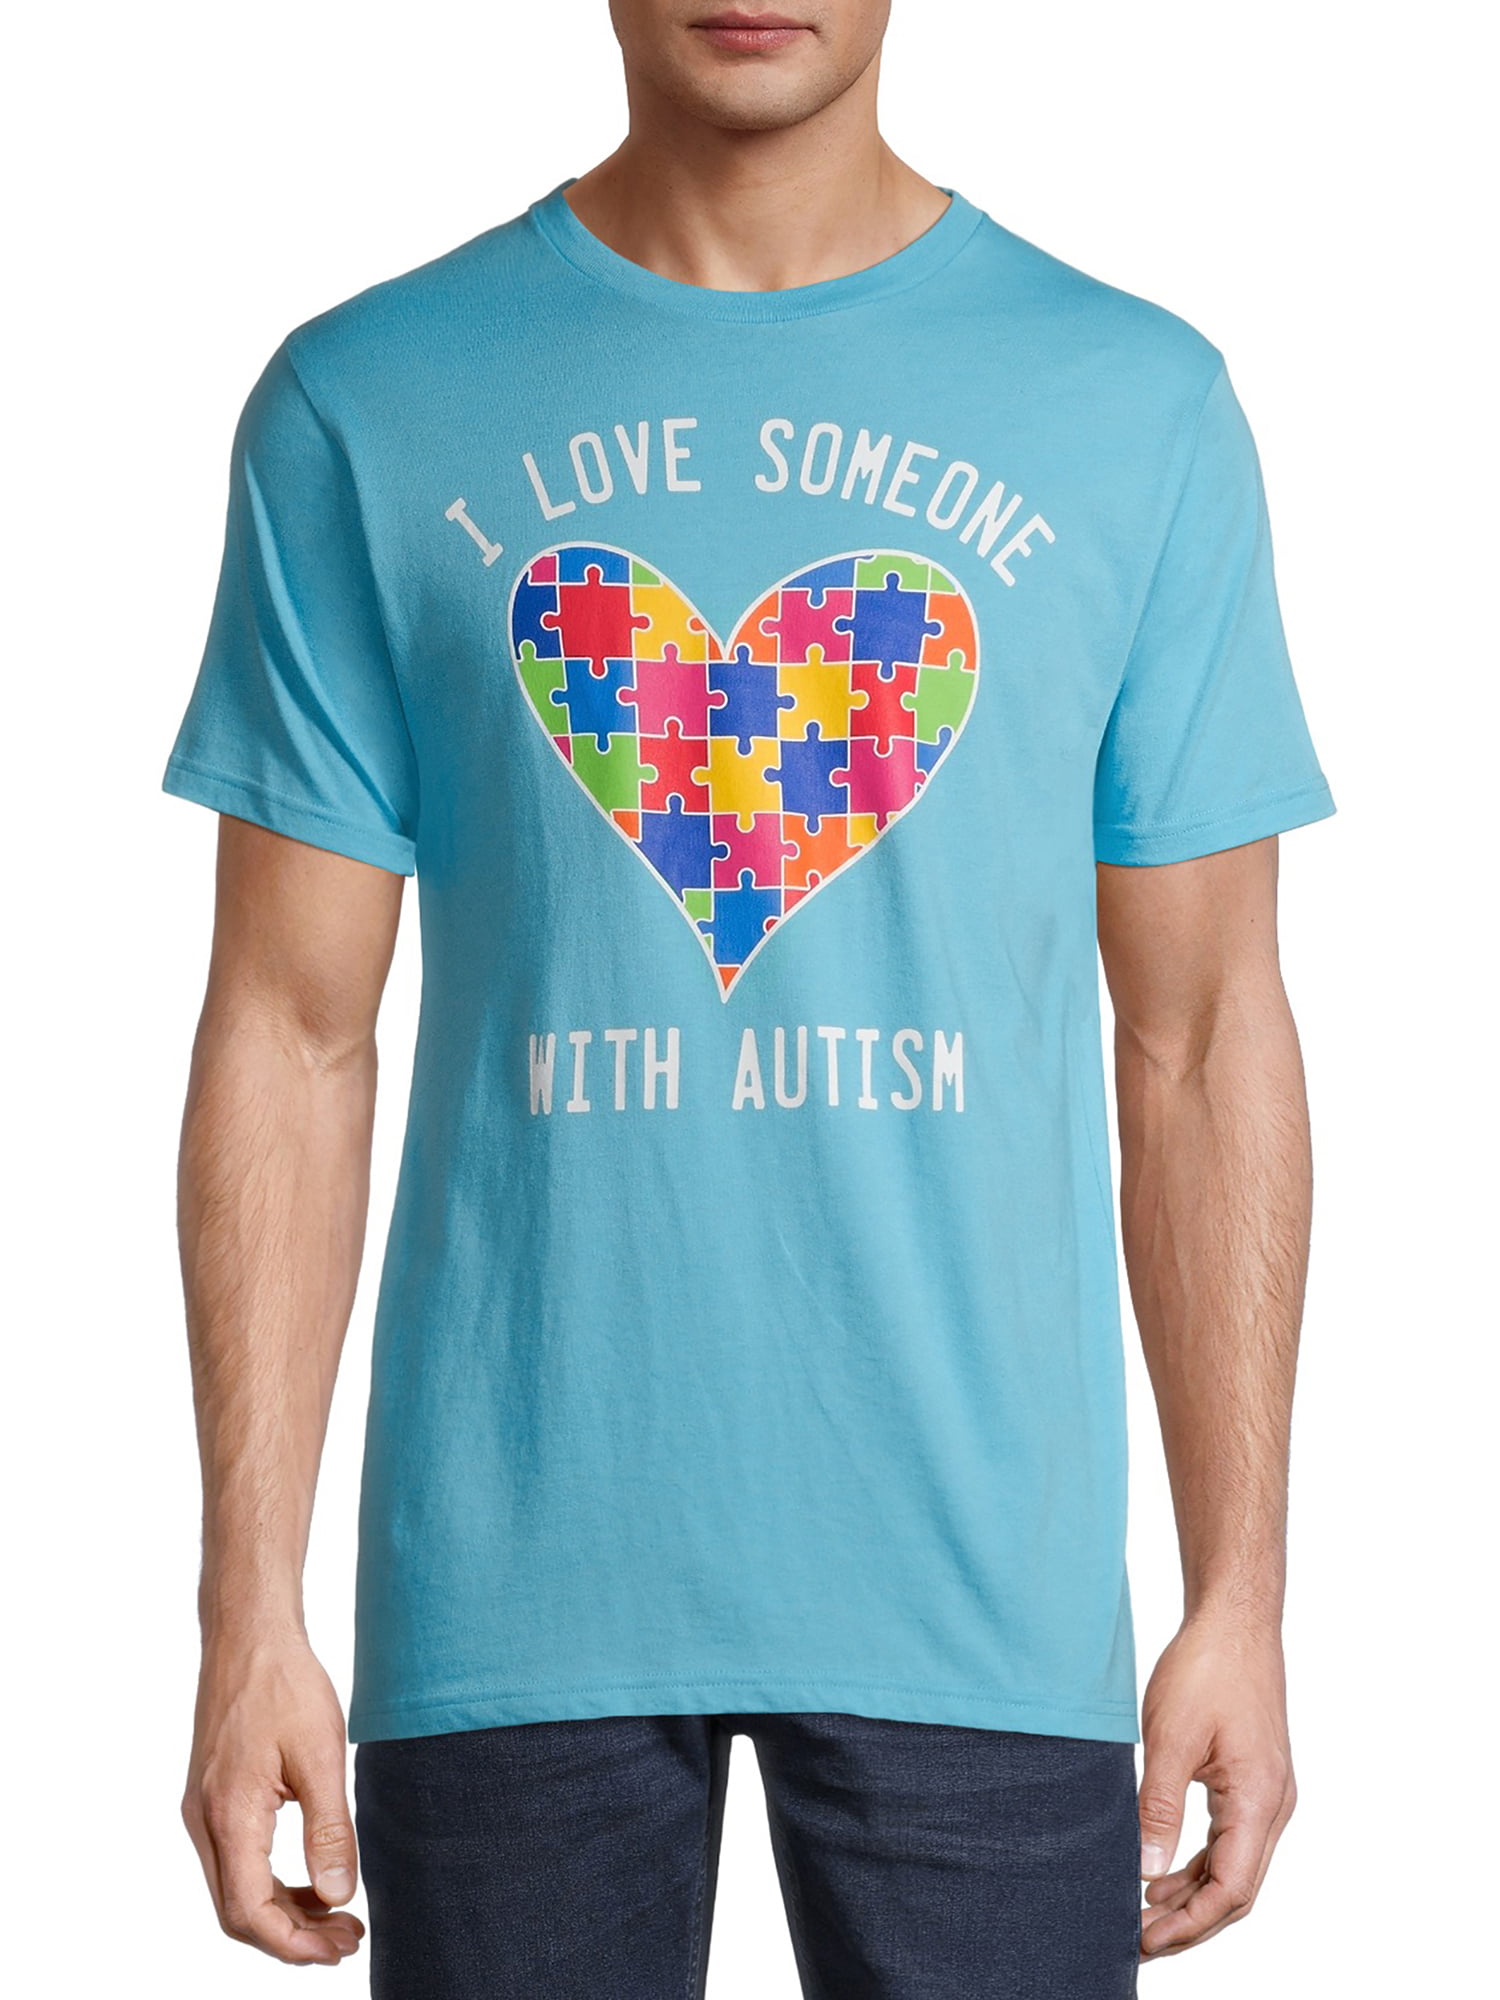 I Love Someone With Autism Support Awareness Adult Short Sleeve Crewneck Tee